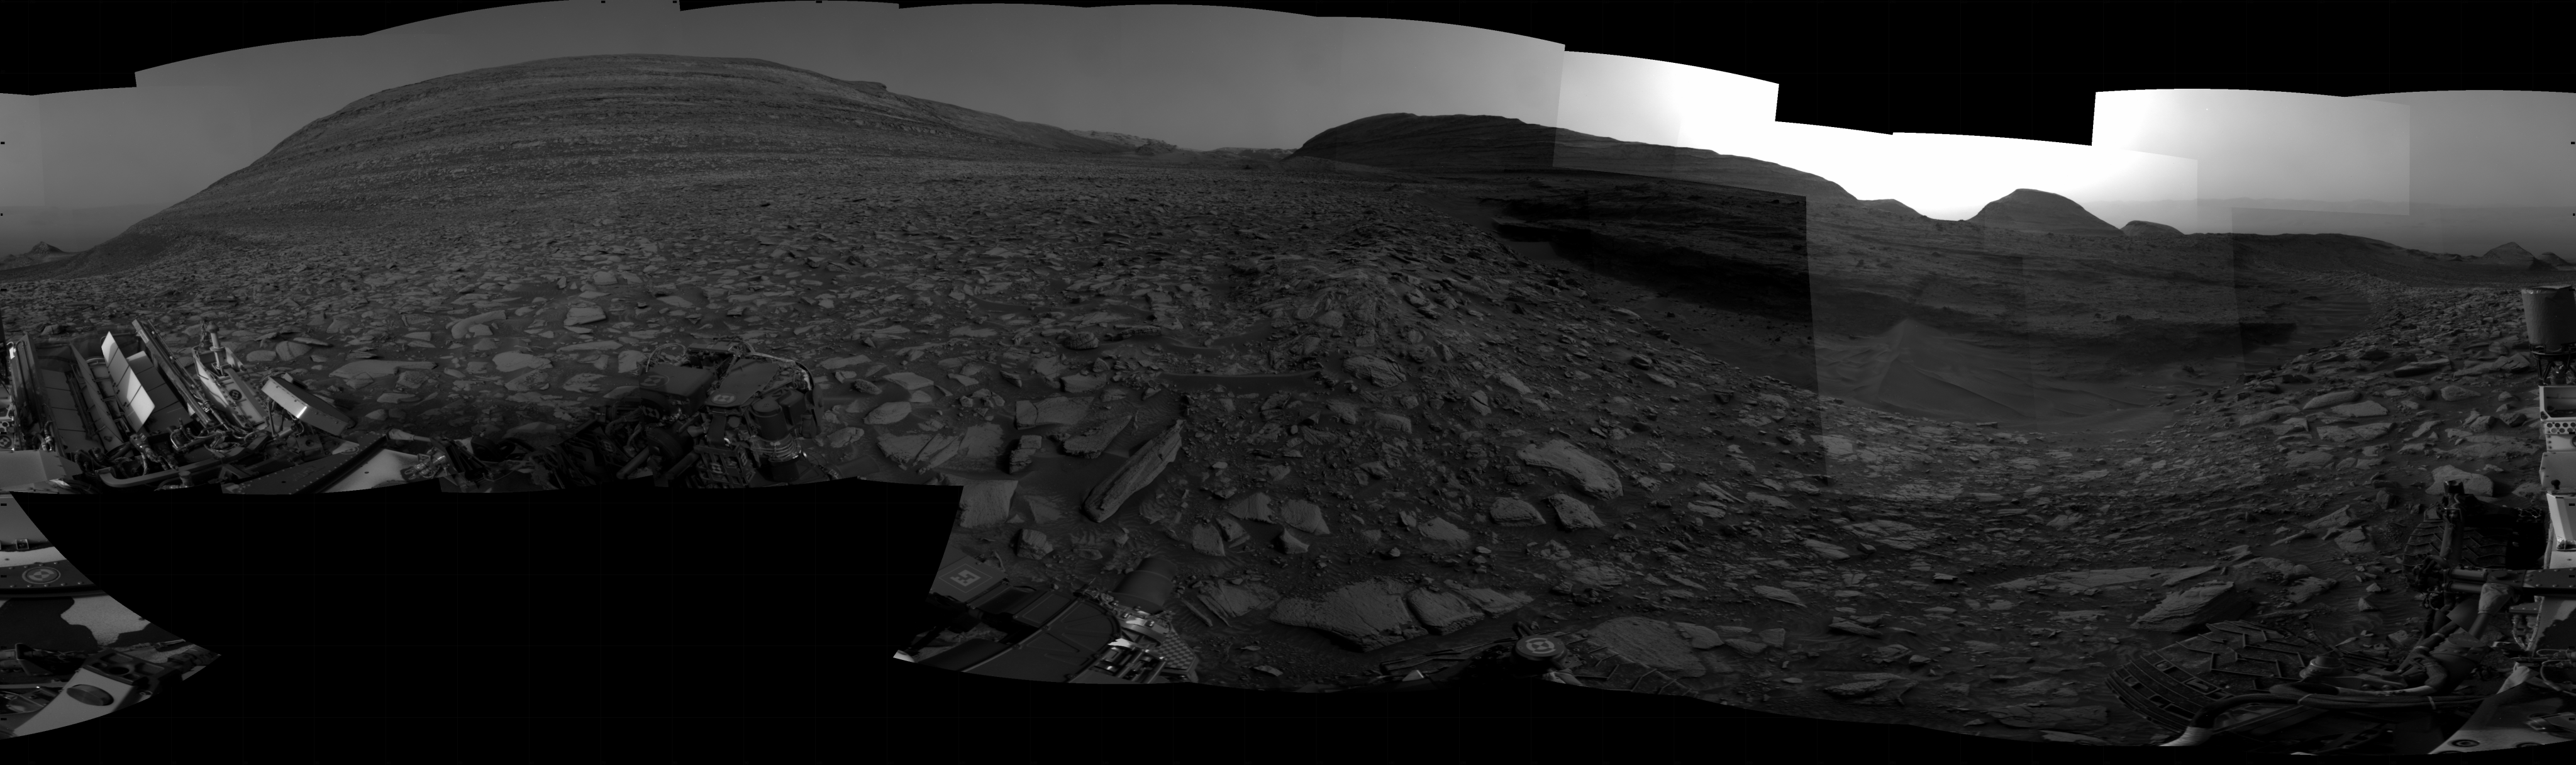 NASA's Mars rover Curiosity took 31 images in Gale Crater using its mast-mounted Right Navigation Camera (Navcam) to create this mosaic. The seam-corrected mosaic provides a 360-degree cylindrical projection panorama of the Martian surface centered at 166 degrees azimuth (measured clockwise from north). Curiosity took the images on March 22, 2024, Sol 4132 of the Mars Science Laboratory mission at drive 954, site number 106. The local mean solar time for the image exposures was from 3 PM to 4 PM. Each Navcam image has a 45 degree field of view.